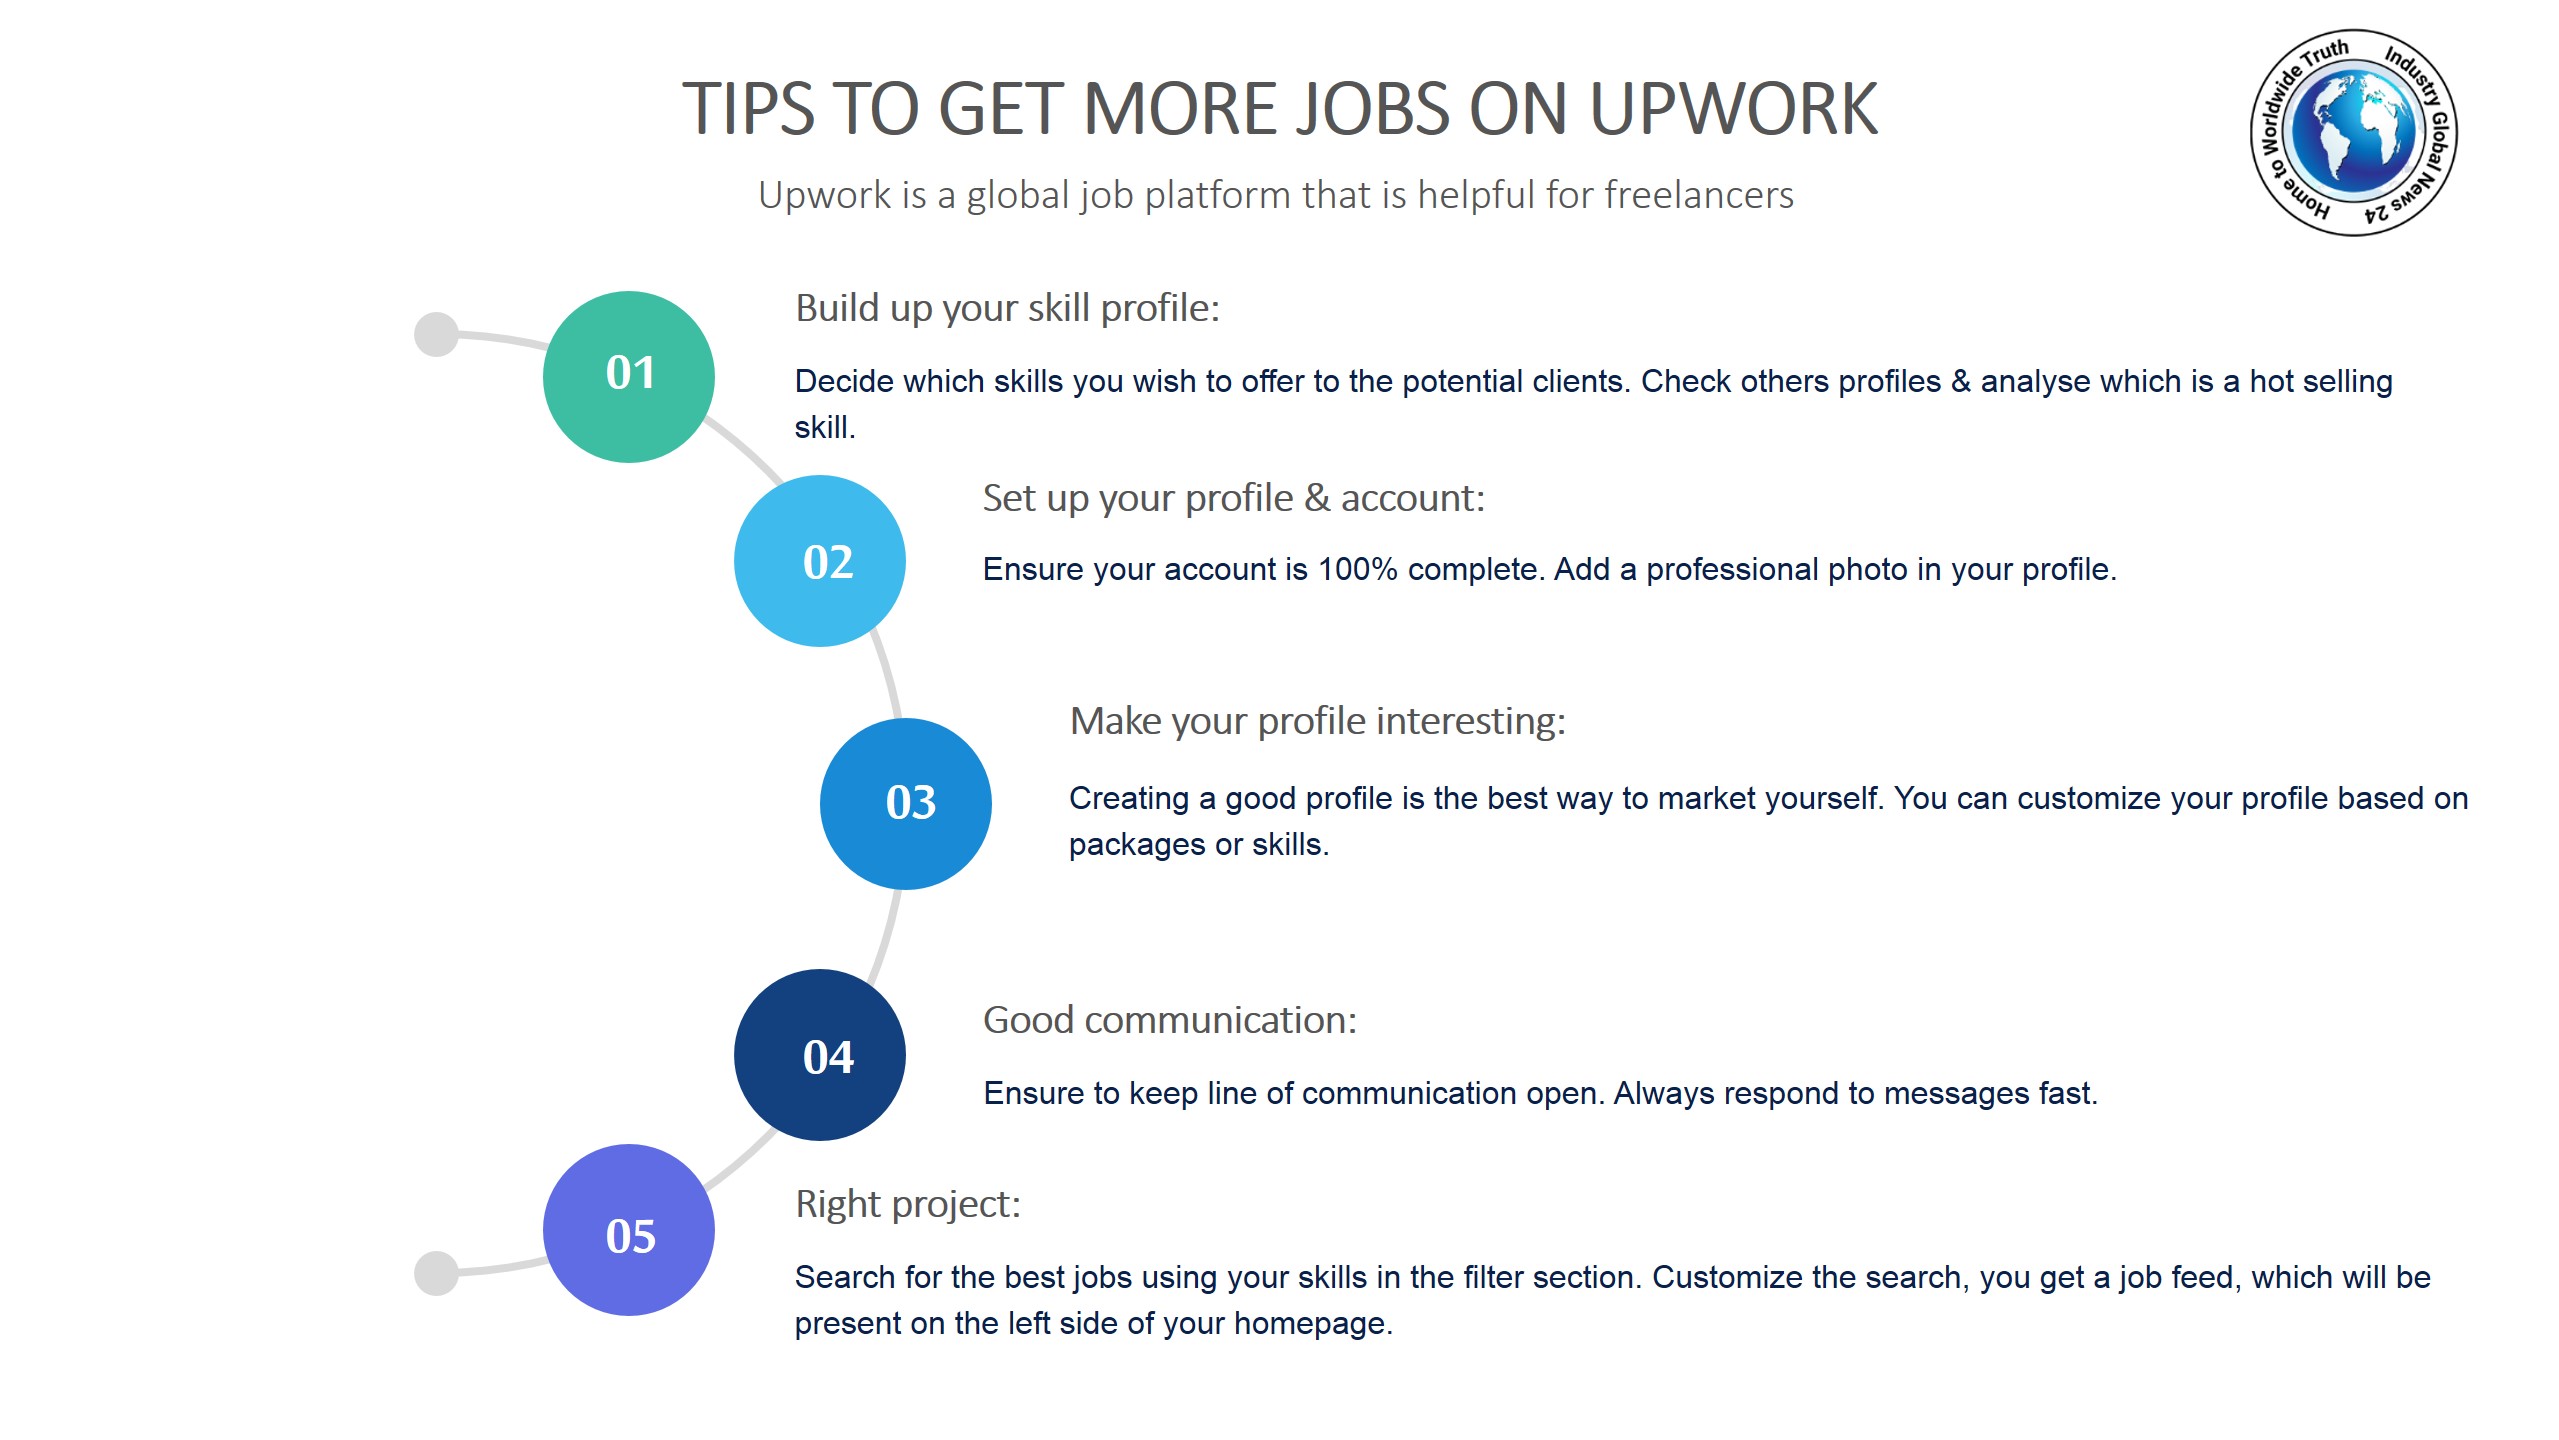 Tips to get more jobs on UpWork